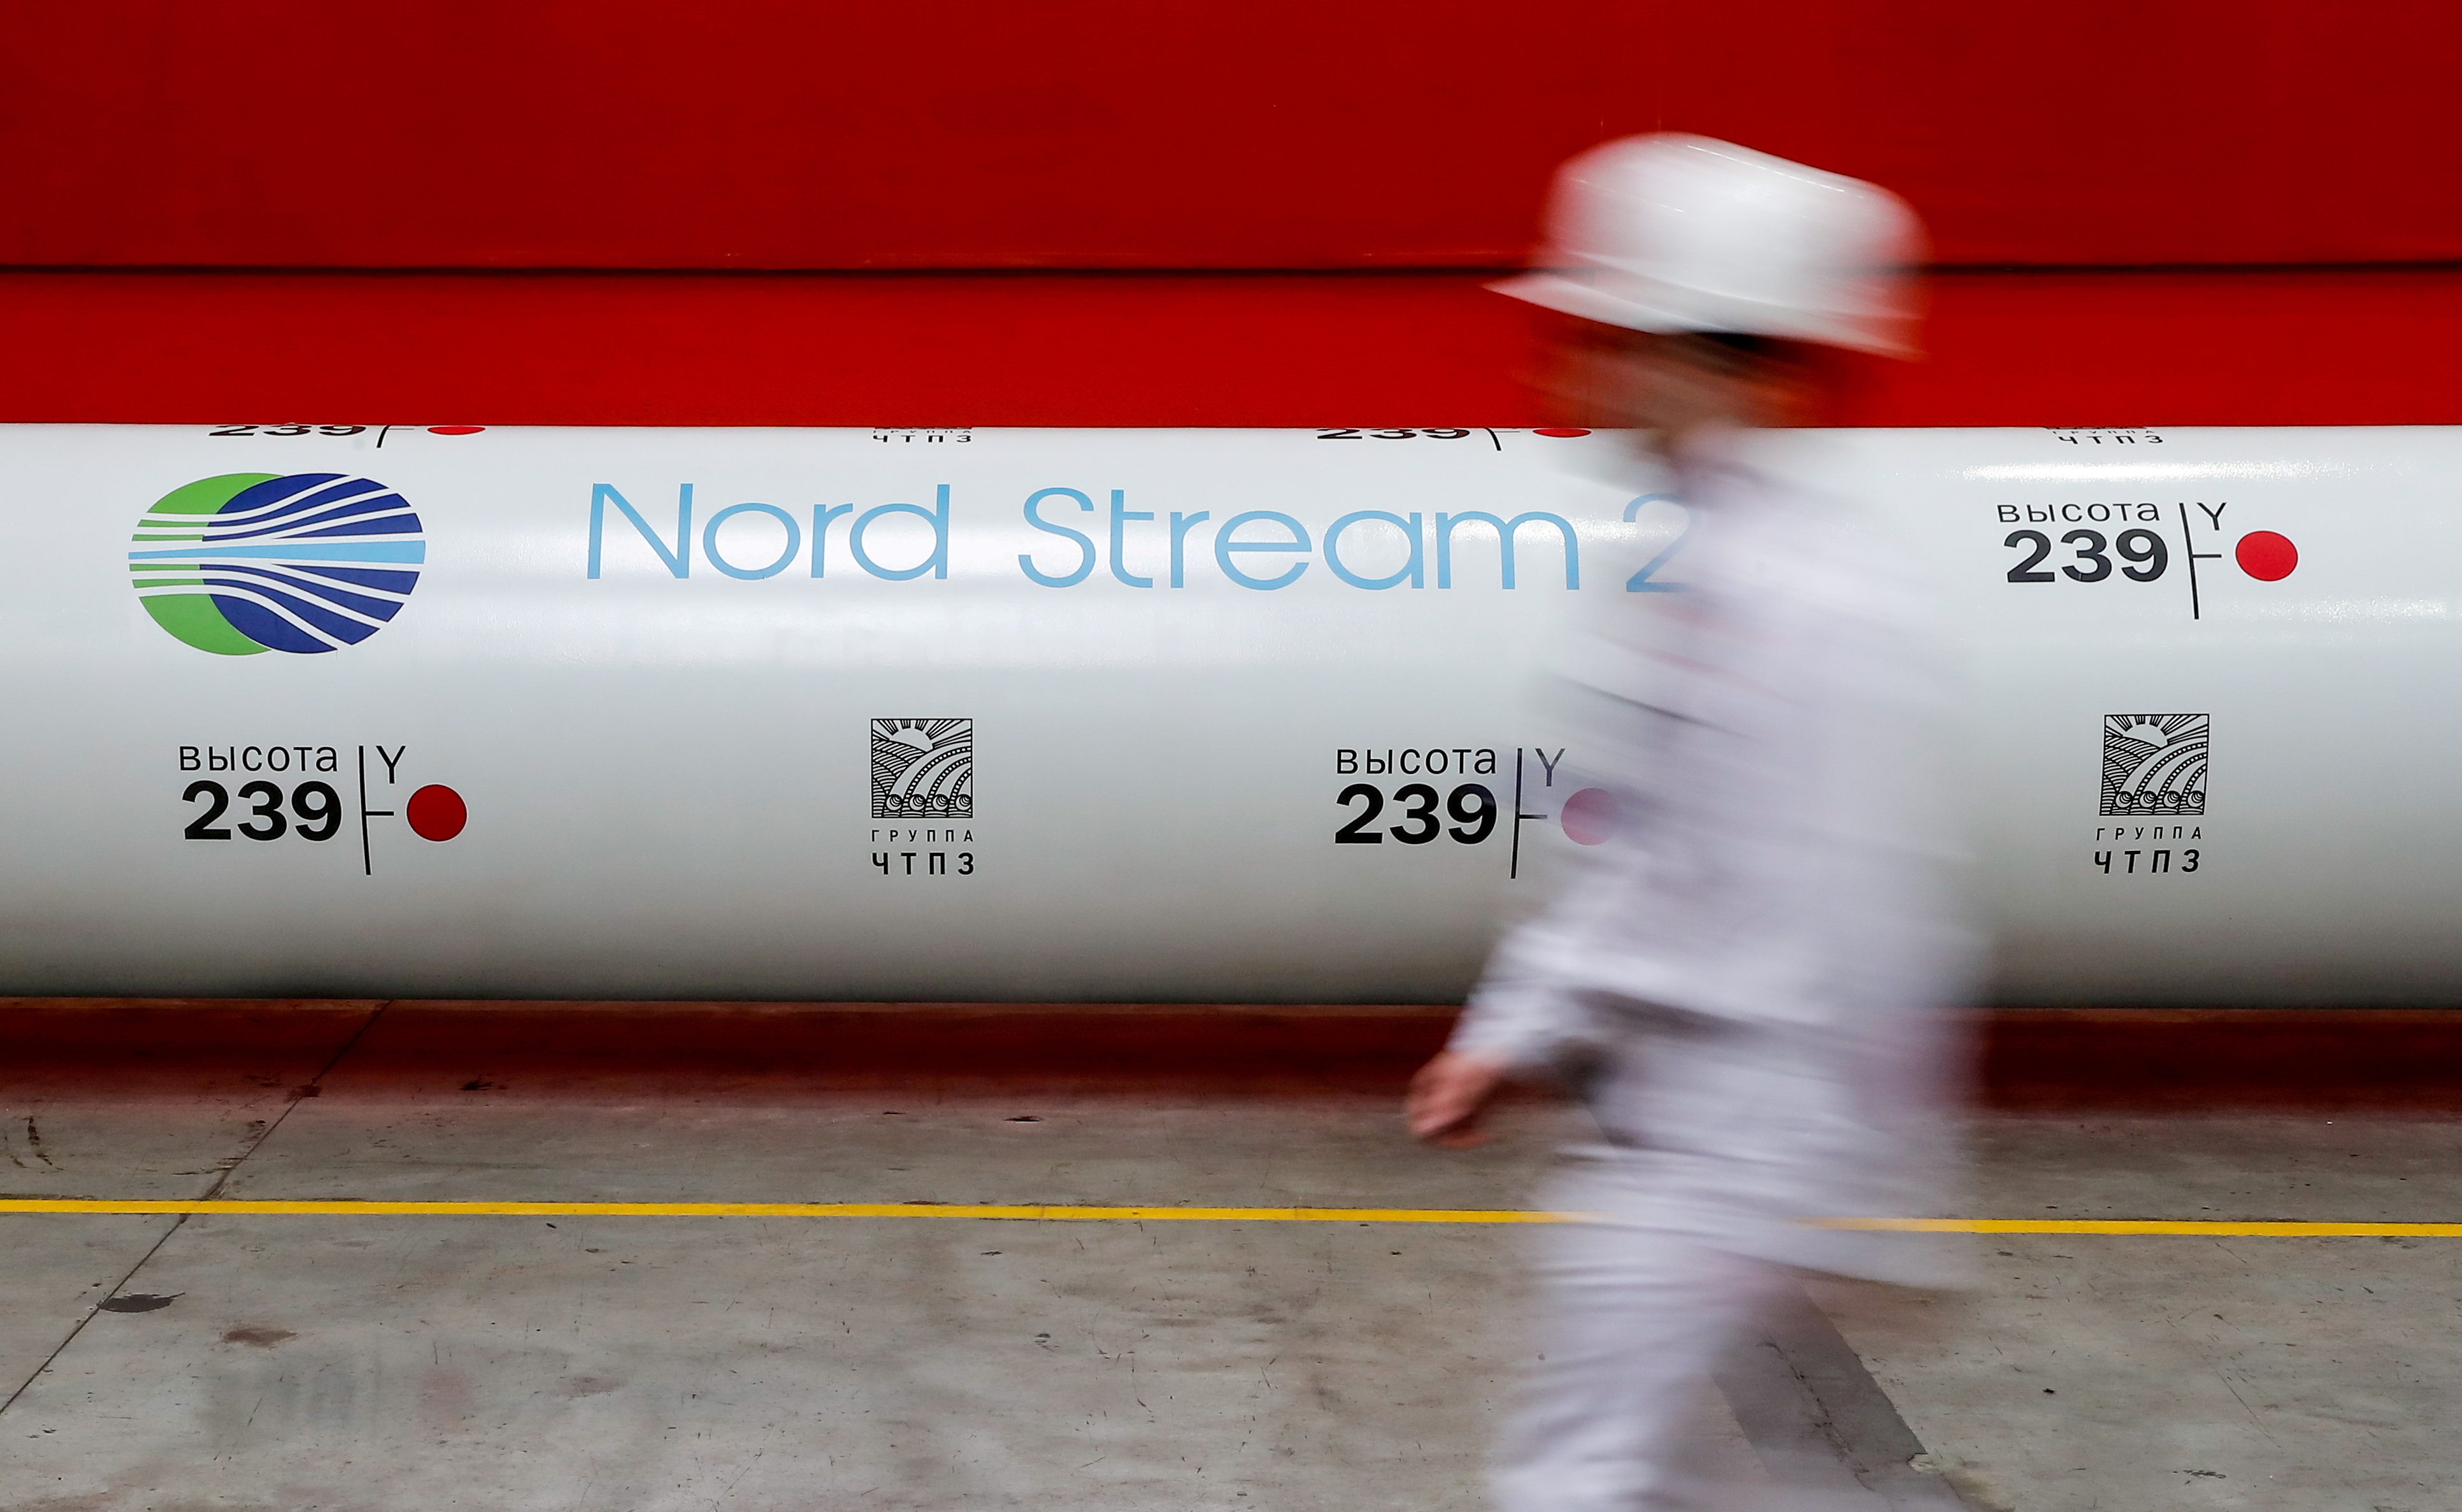 The logo of the Nord Stream 2 gas pipeline project is seen on a pipe at the Chelyabinsk pipe rolling plant in Chelyabinsk, Russia, February 26, 2020.  REUTERS/Maxim Shemetov/File Photo